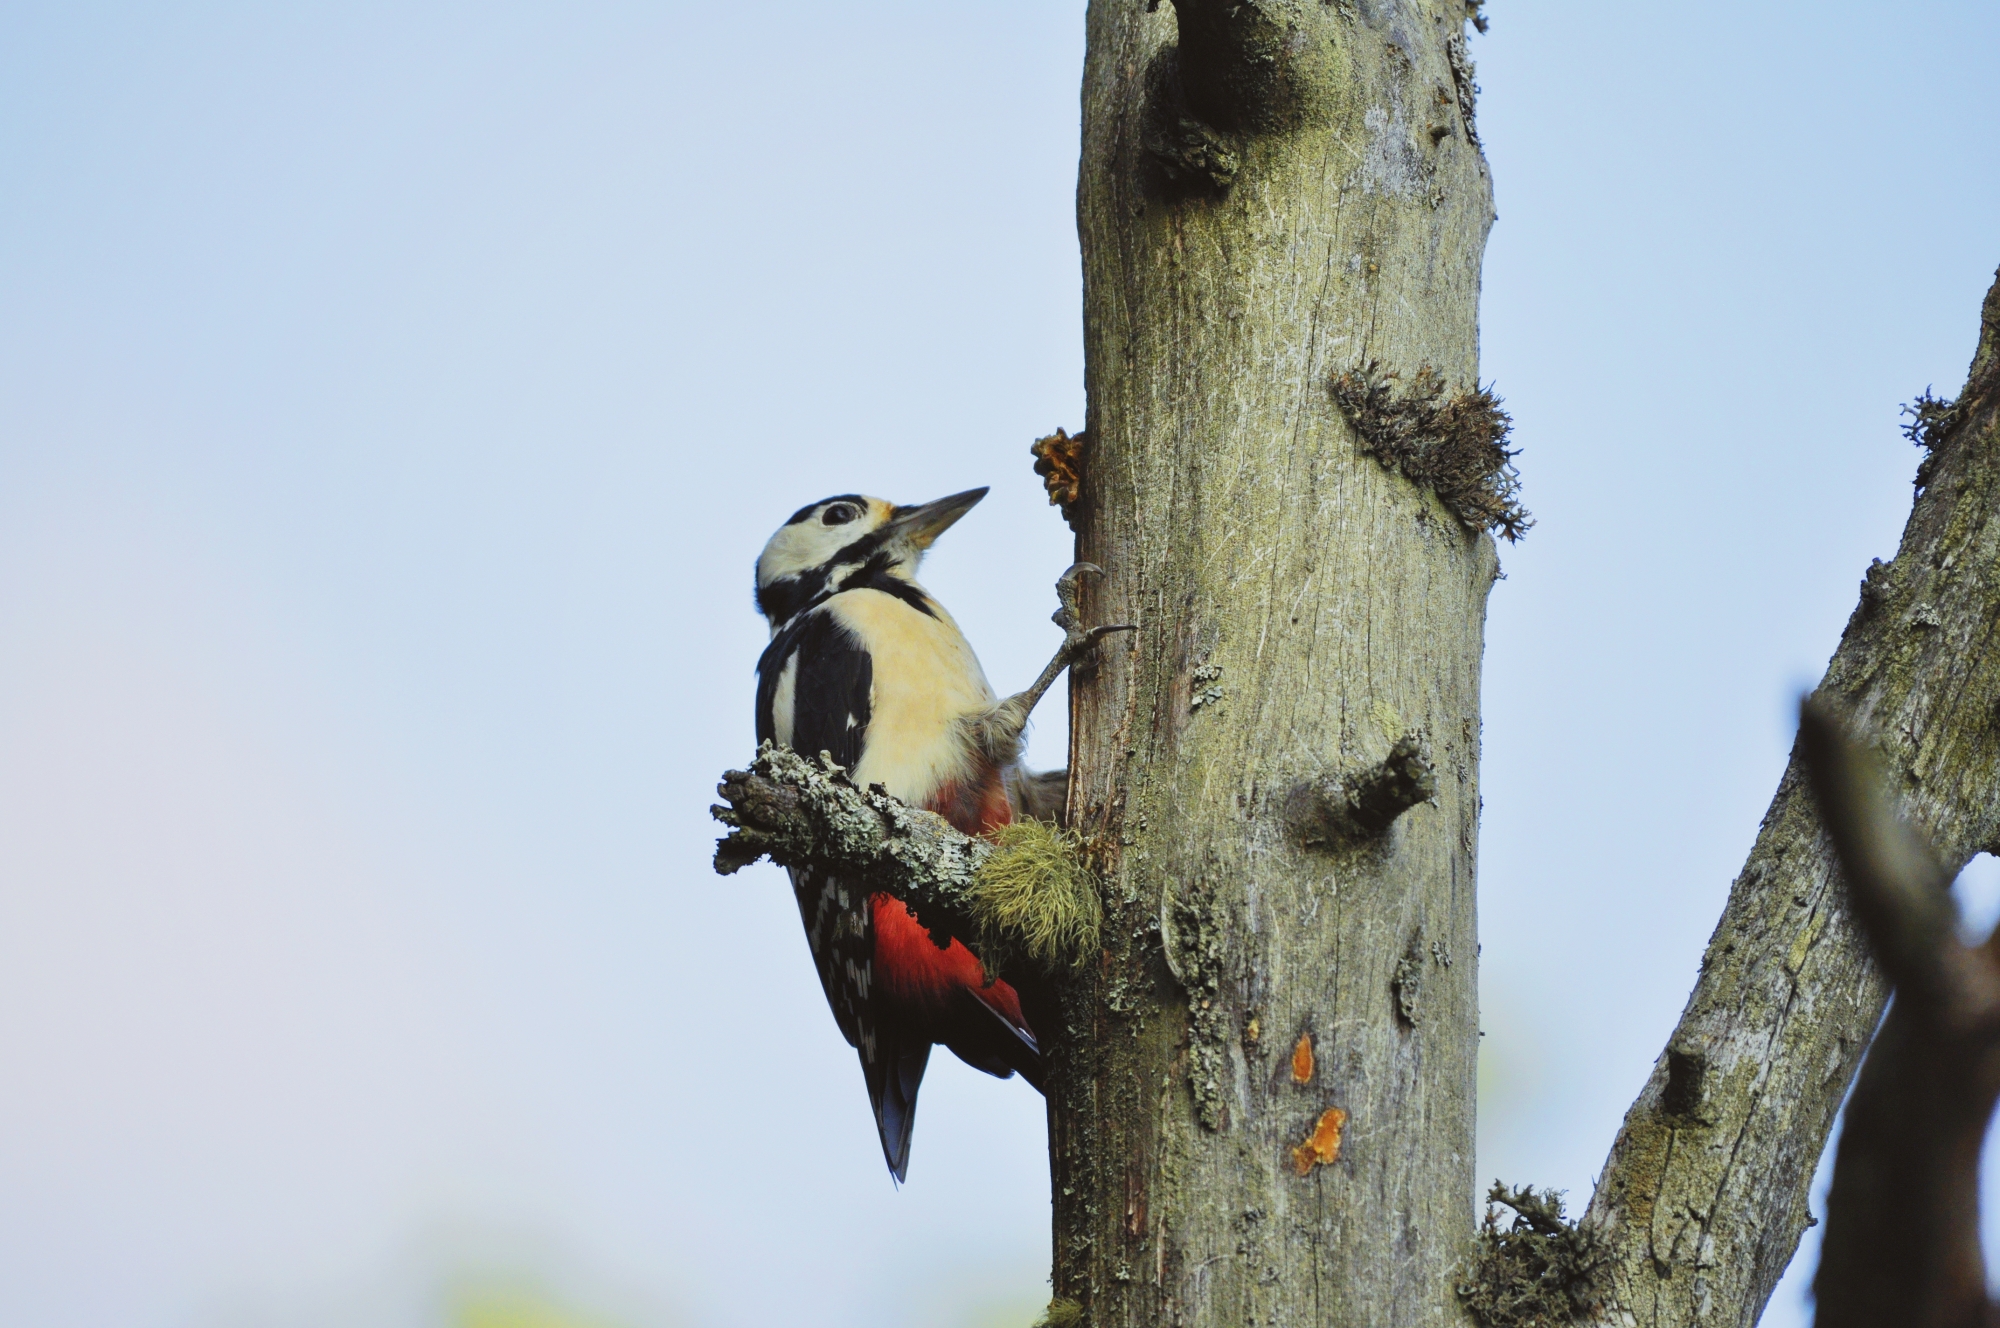 A Great Spotted Woodpecker makes its mark on a tree